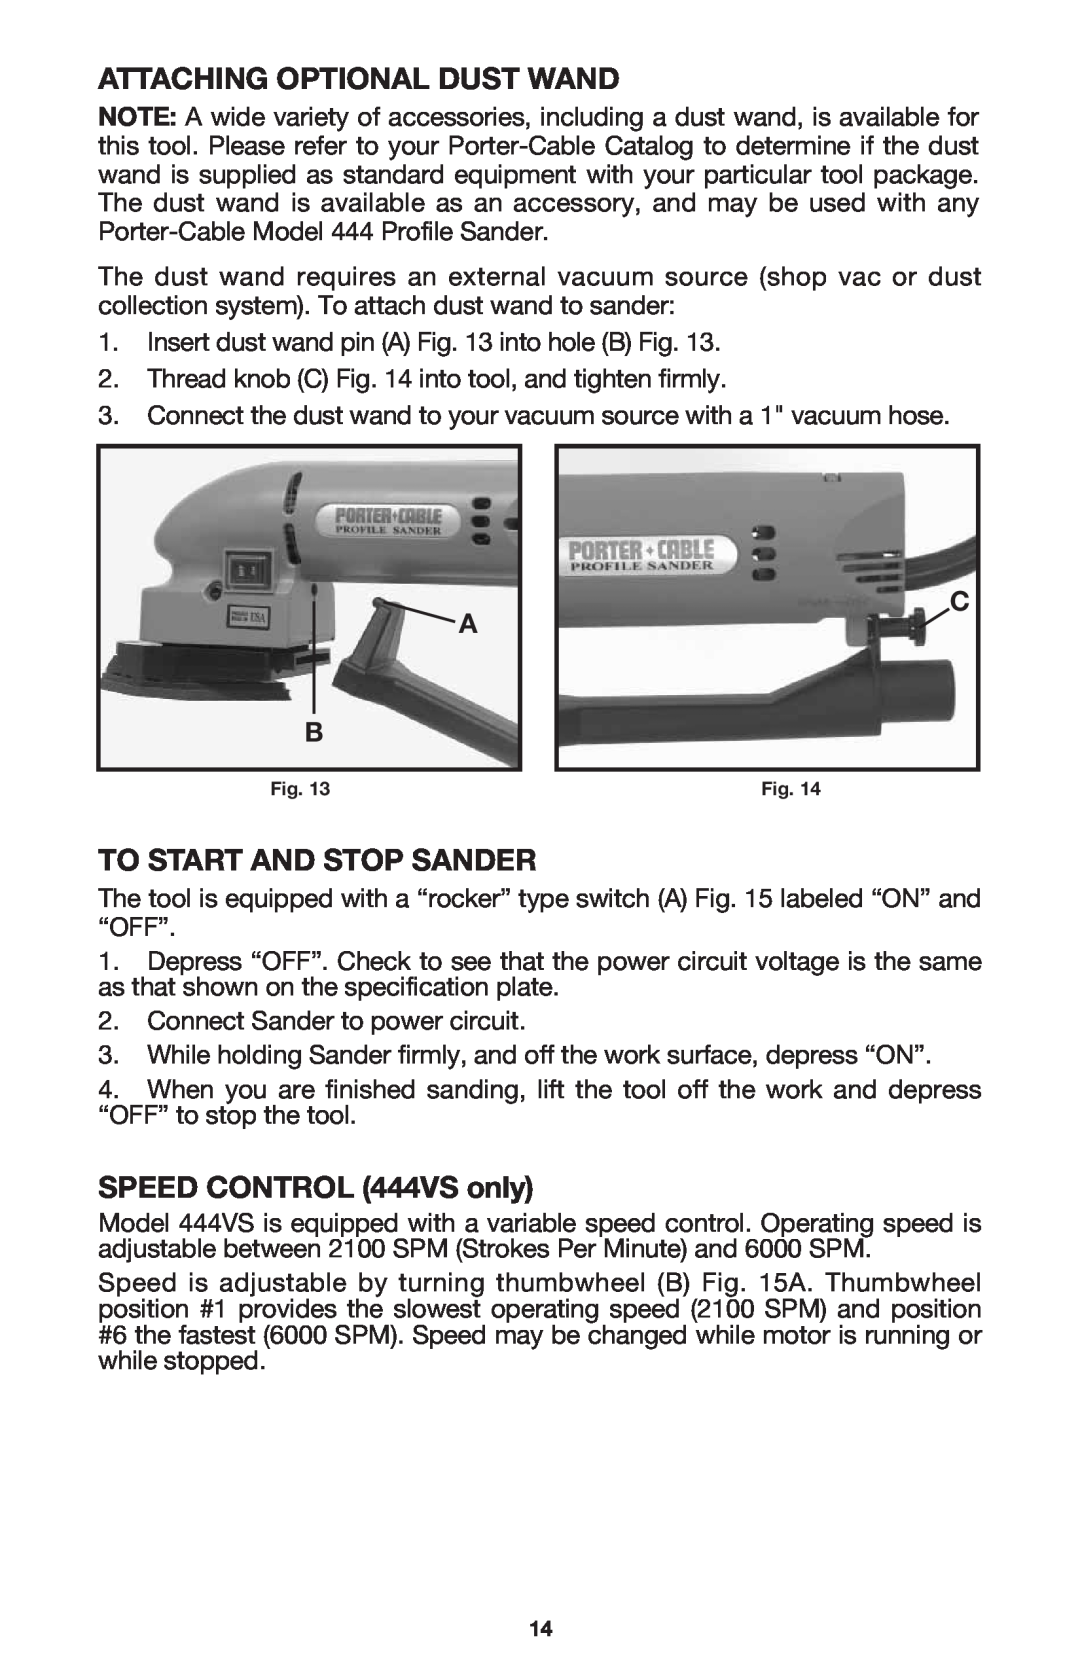 Porter-Cable 444vs instruction manual Attaching Optional Dust Wand, To Start And Stop Sander, SPEED CONTROL 444VS only 